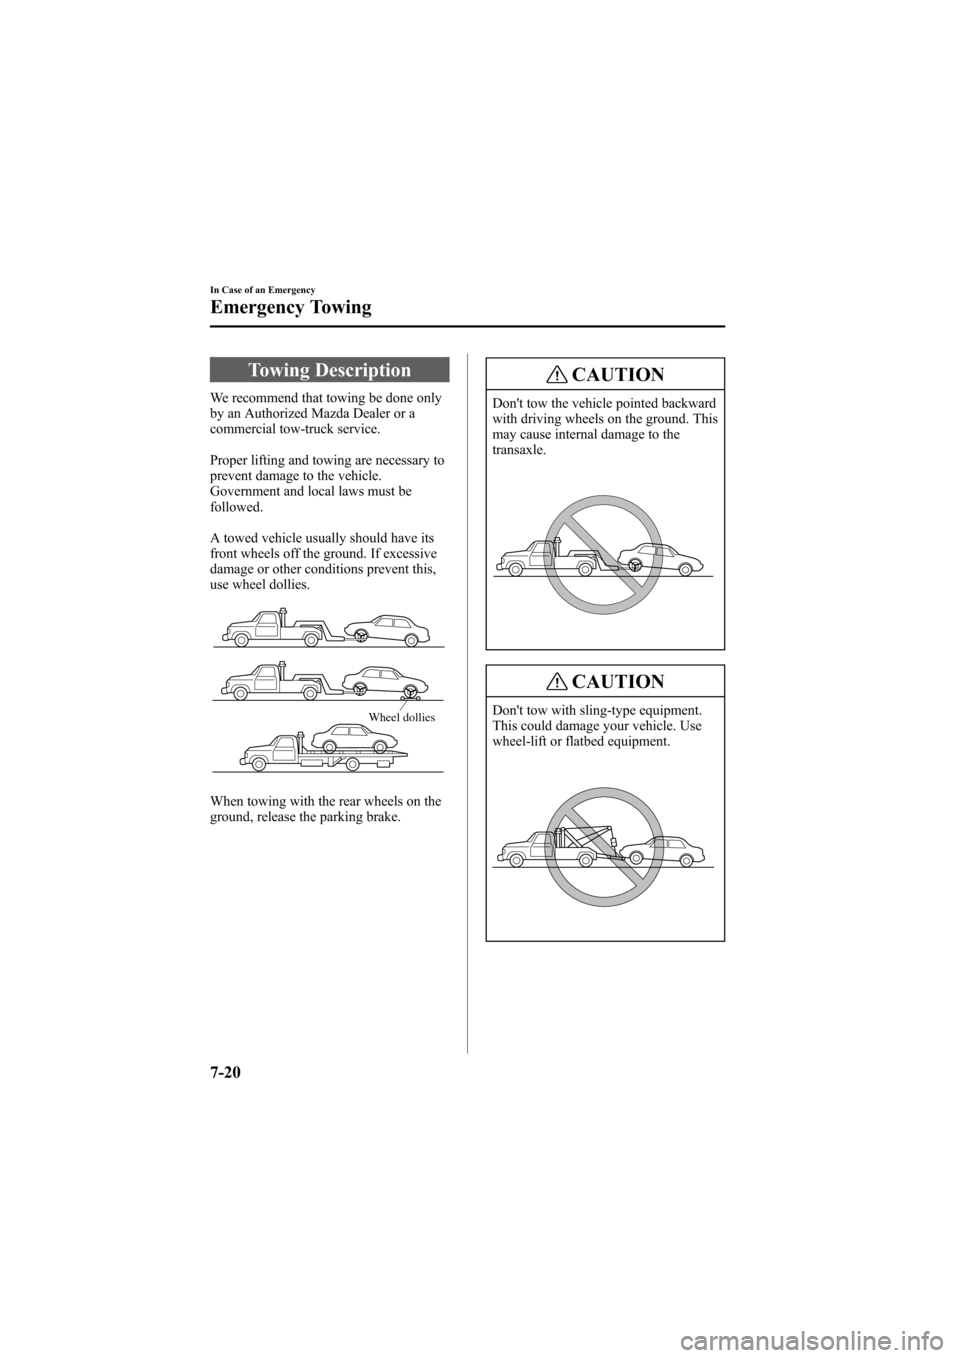 MAZDA MODEL 6 2005  Owners Manual (in English) Black plate (248,1)
Towing Description
We recommend that towing be done only
by an Authorized Mazda Dealer or a
commercial tow-truck service.
Proper lifting and towing are necessary to
prevent damage 